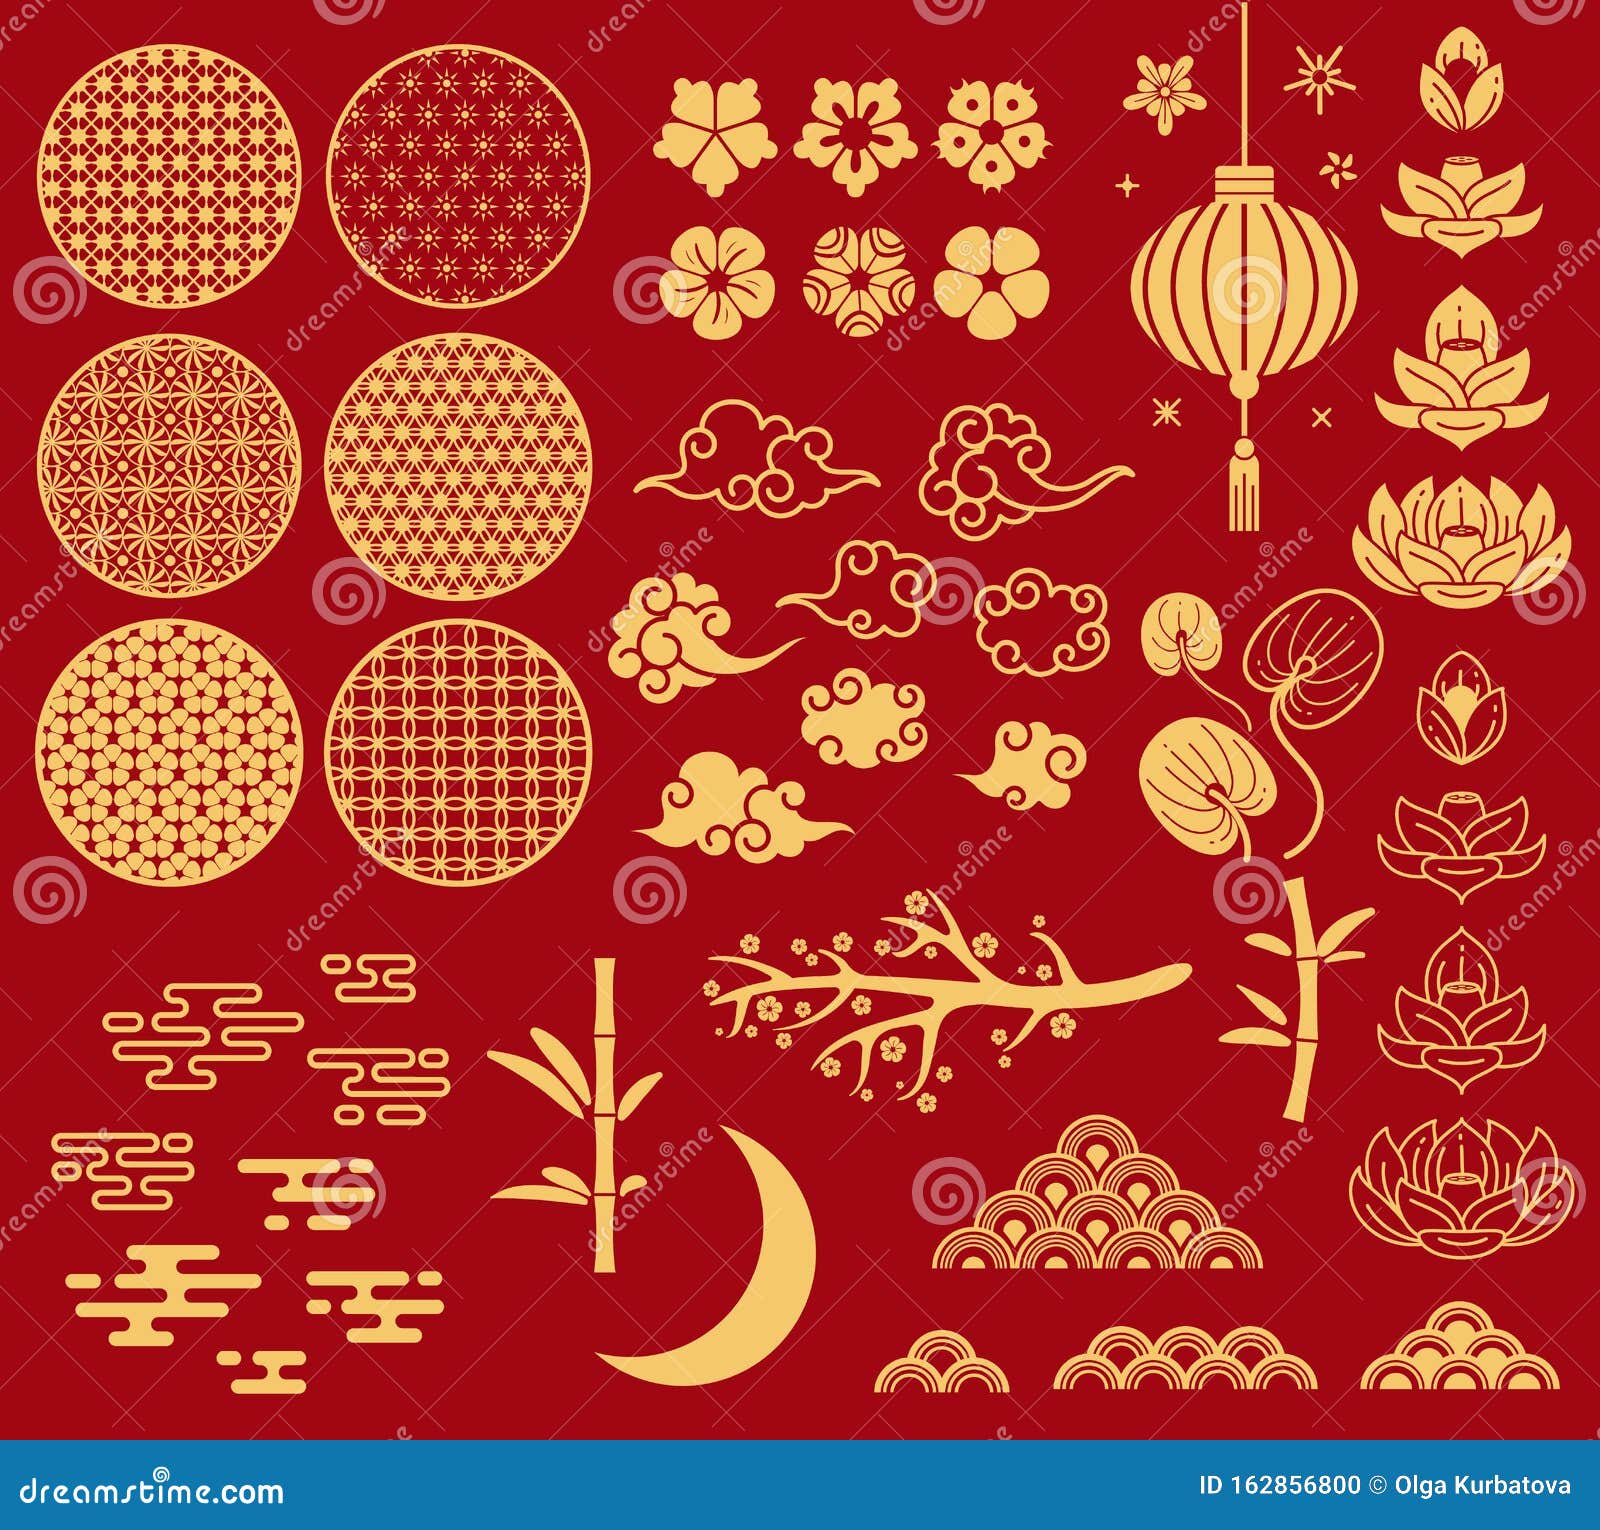 chinese new year s. festive asian ornaments, patterns in oriental style. clouds, moon and bamboo, sakura and